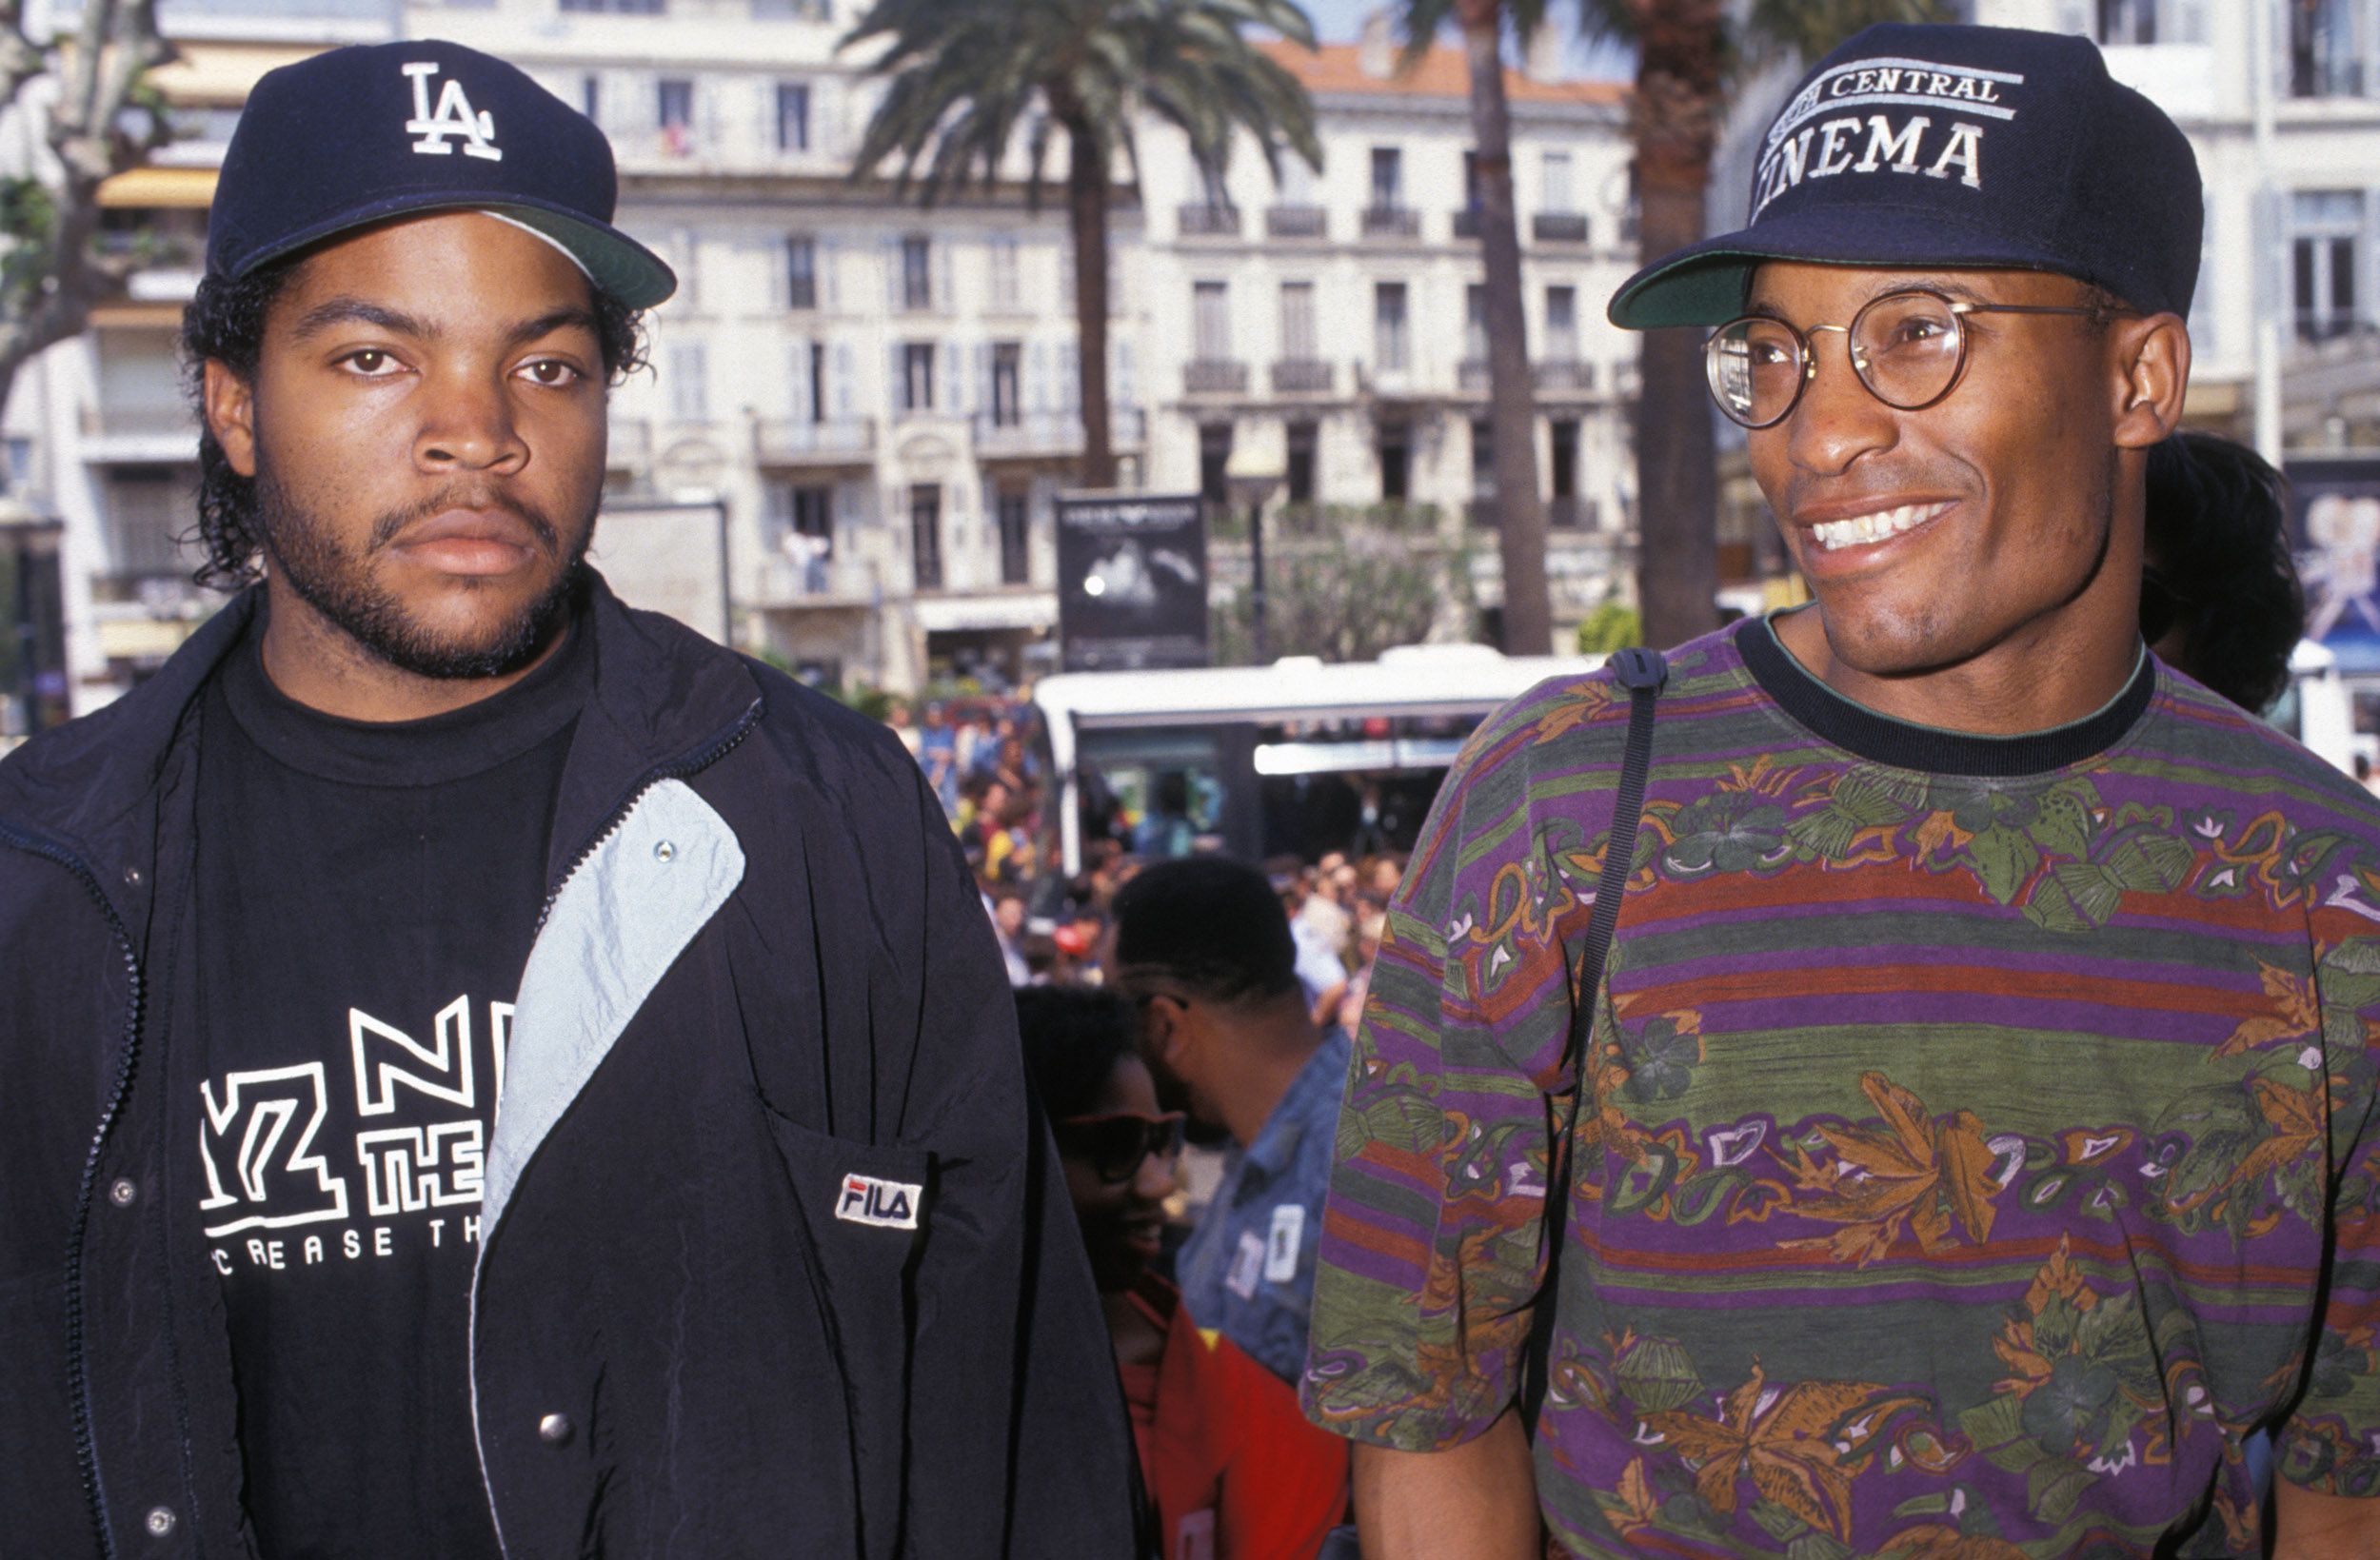 Rare Photos of '90s Hip-Hop Stars Dr Dre, Snoop Dogg, Tupac, and More